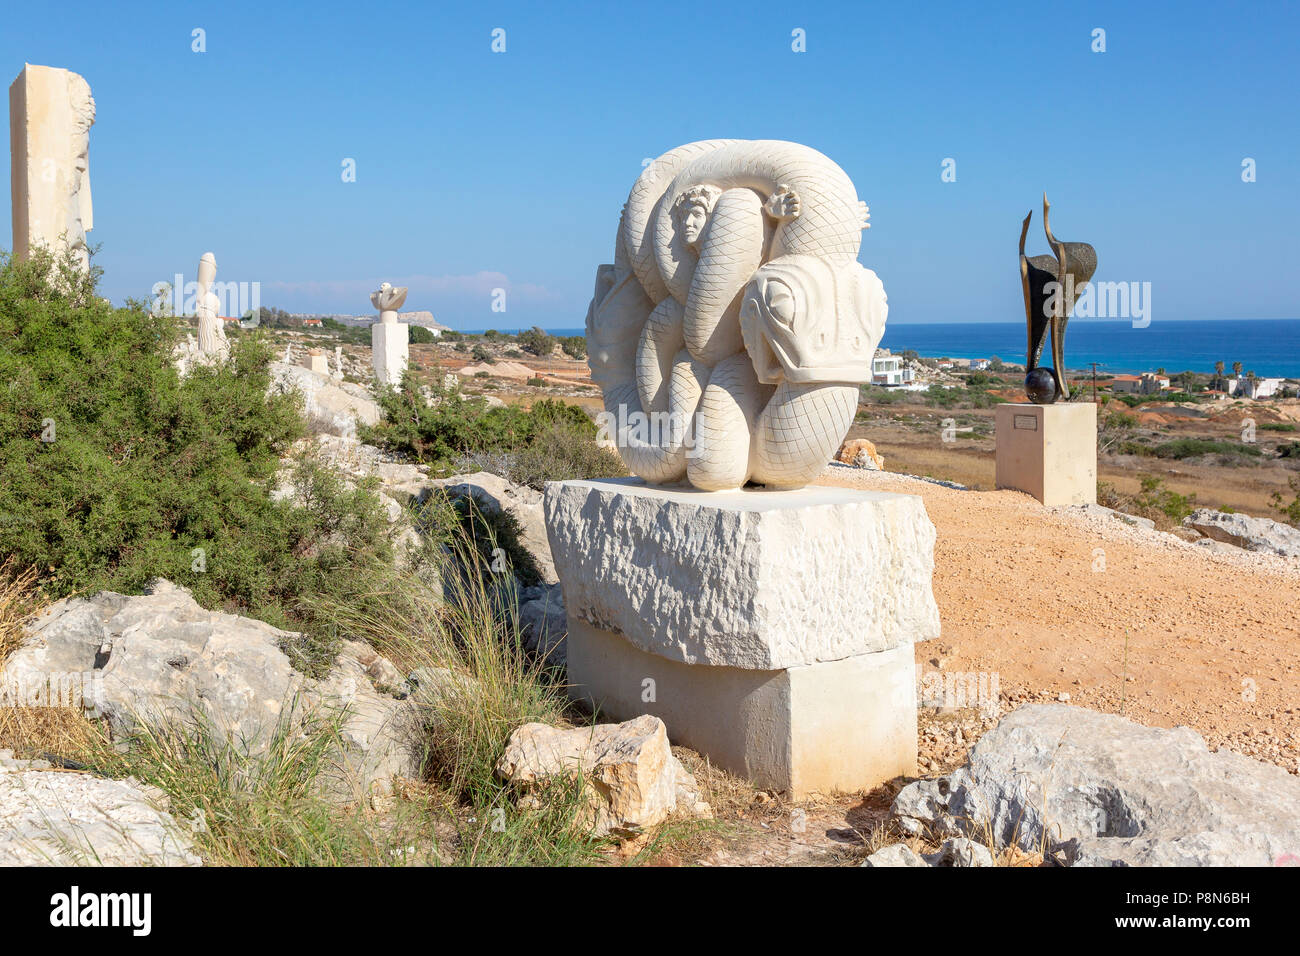 Sculpture called Uroboros by the Uraguaian sculptor Gissella Garcia in 2017 and situated in the Ayia Napa International Sculpture Park, Open Sculpture Stock Photo